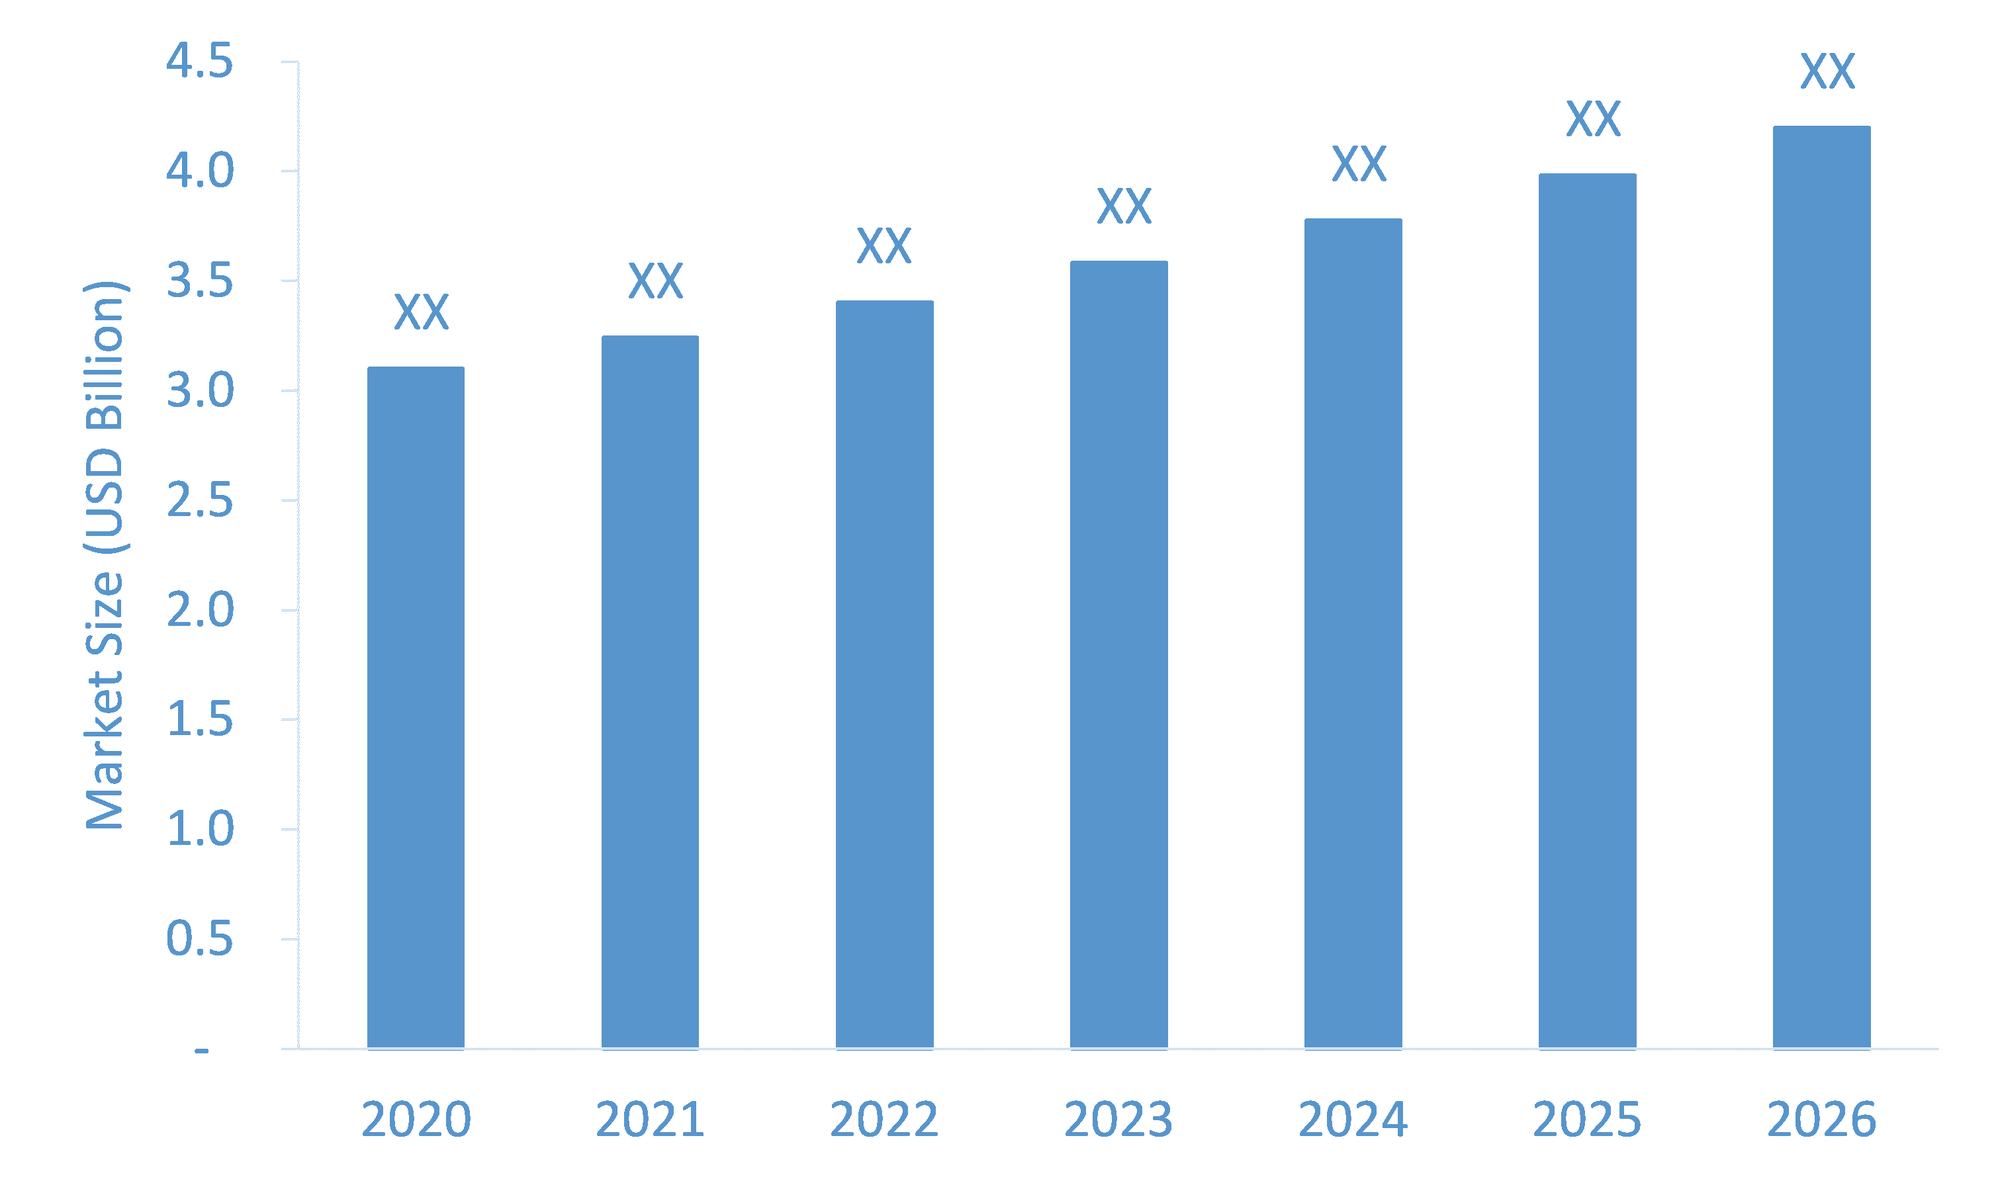 Dialysis Machines Market is Anticipated to Grow at an Impressive CAGR During 2022-2026